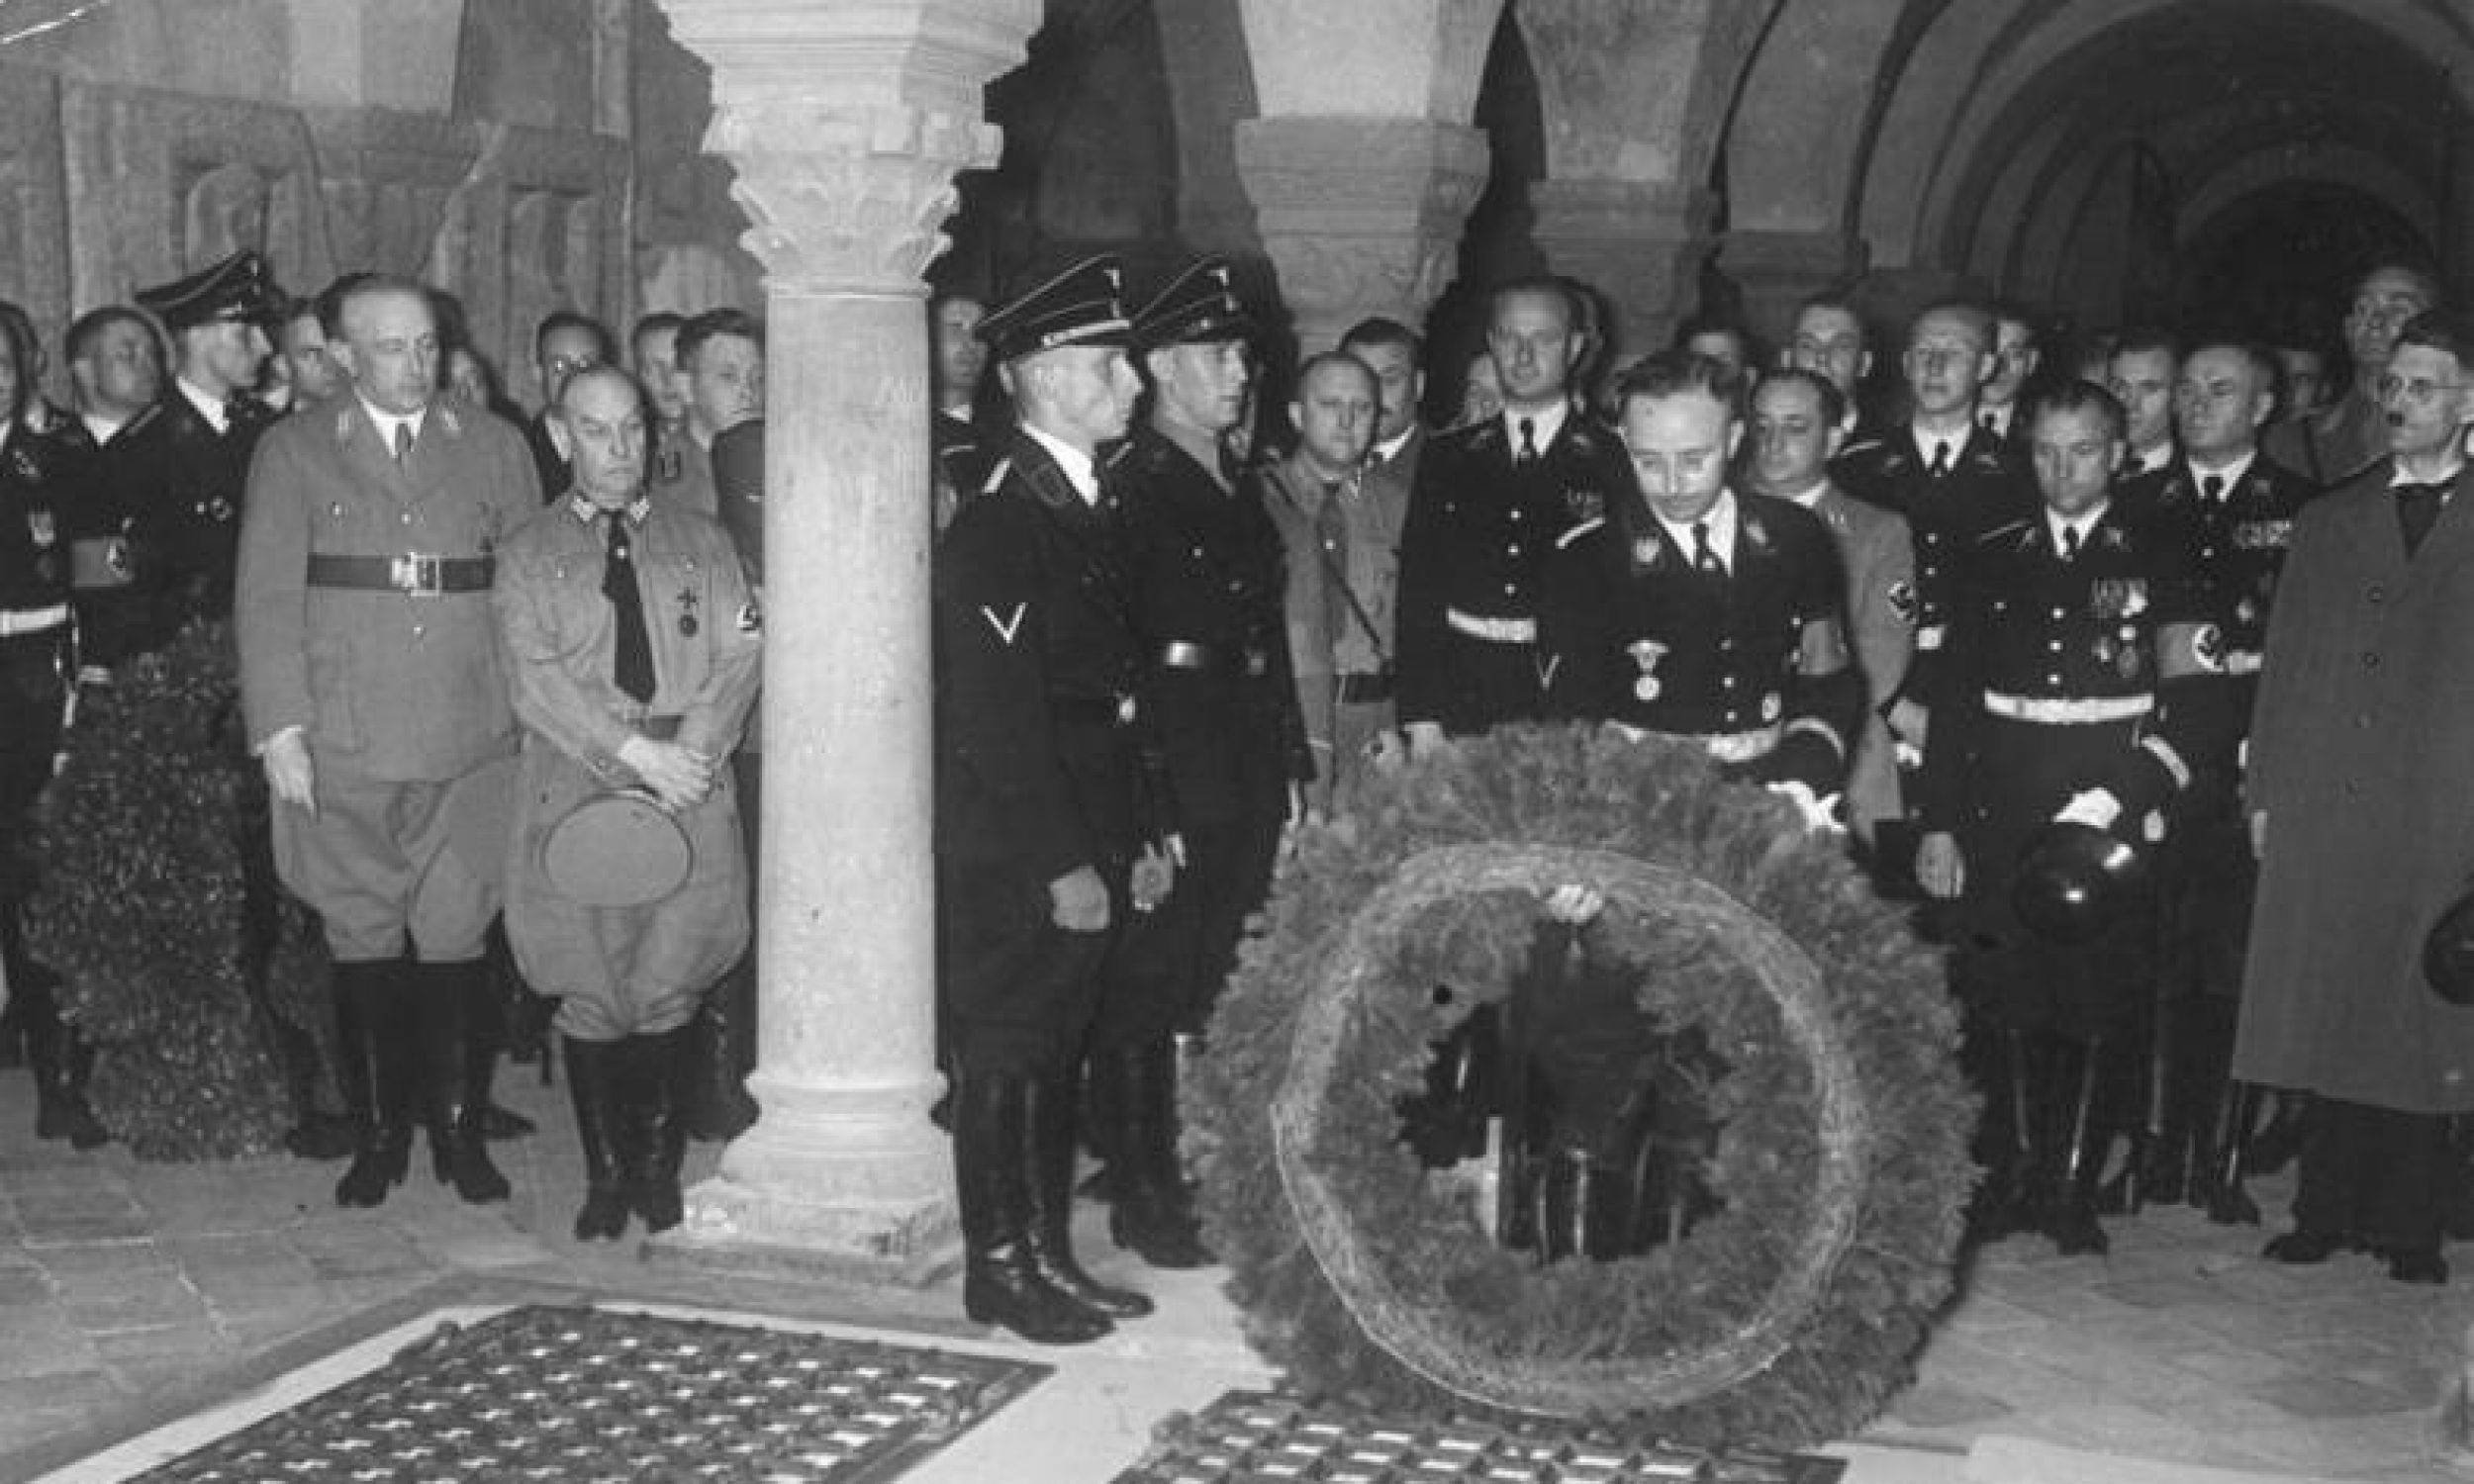 “Heinrich’s Feast” 1938. Himmler lays a wreath on the tomb of Heinrich I at the collegiate church in Quedlinburg. “Heinrichsfeiern” were celebrated by the SS from 1936-1939, after archaeologists from Ahnenerbe began searching for the bones of Heinrich I. Photo: Bundesarchiv, Bild 183-H08447 / CC-BY-SA 3.0, CC BY-SA 3.0 de, Wikimedia 